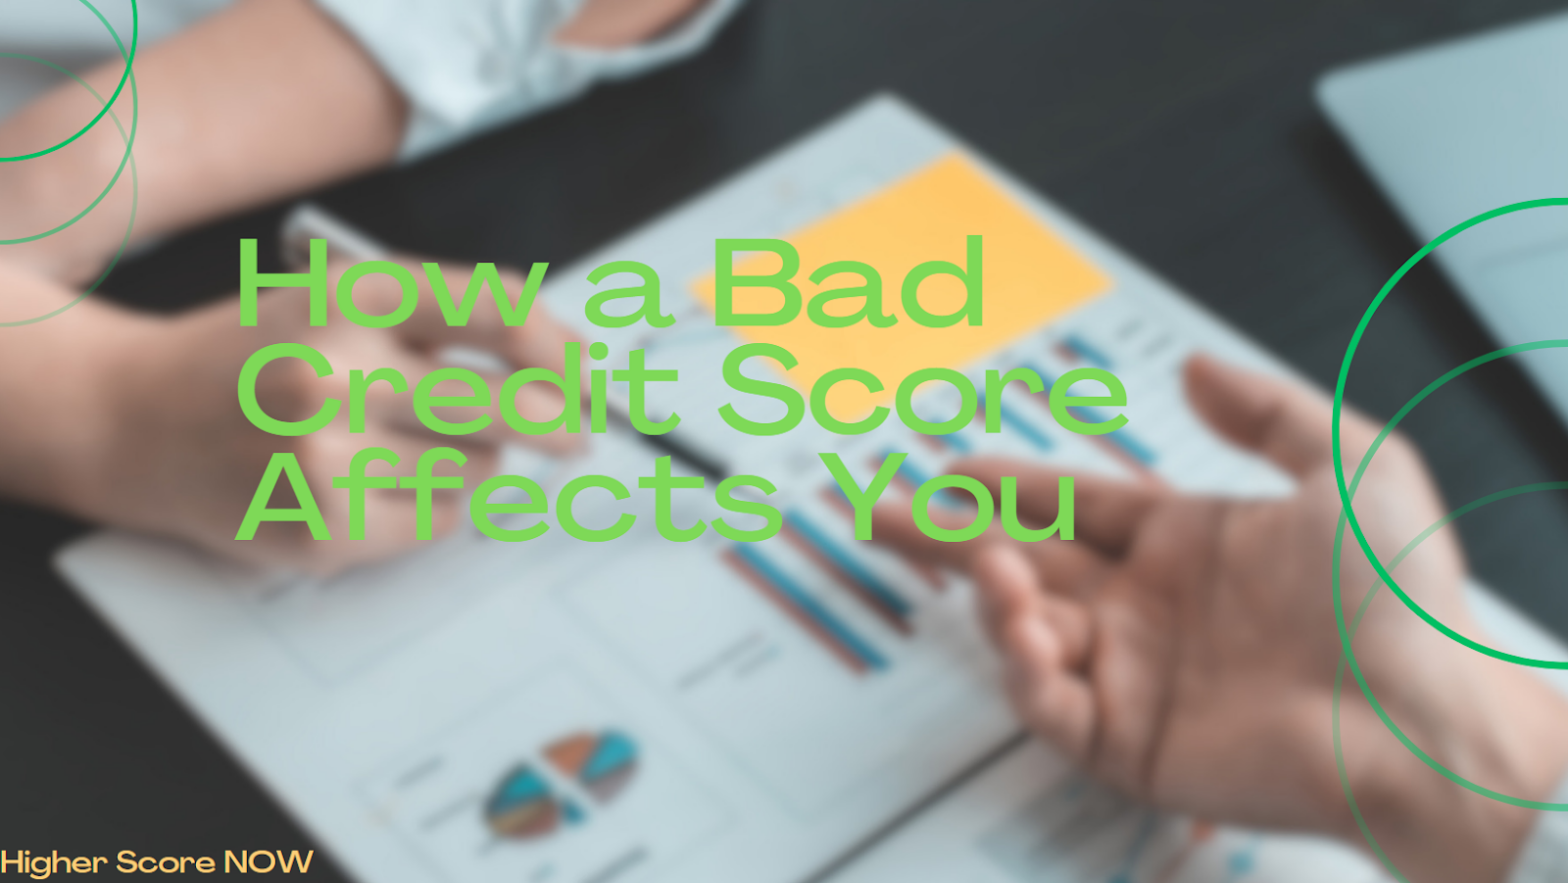 How Much Will a Bad Credit Score Cost You?